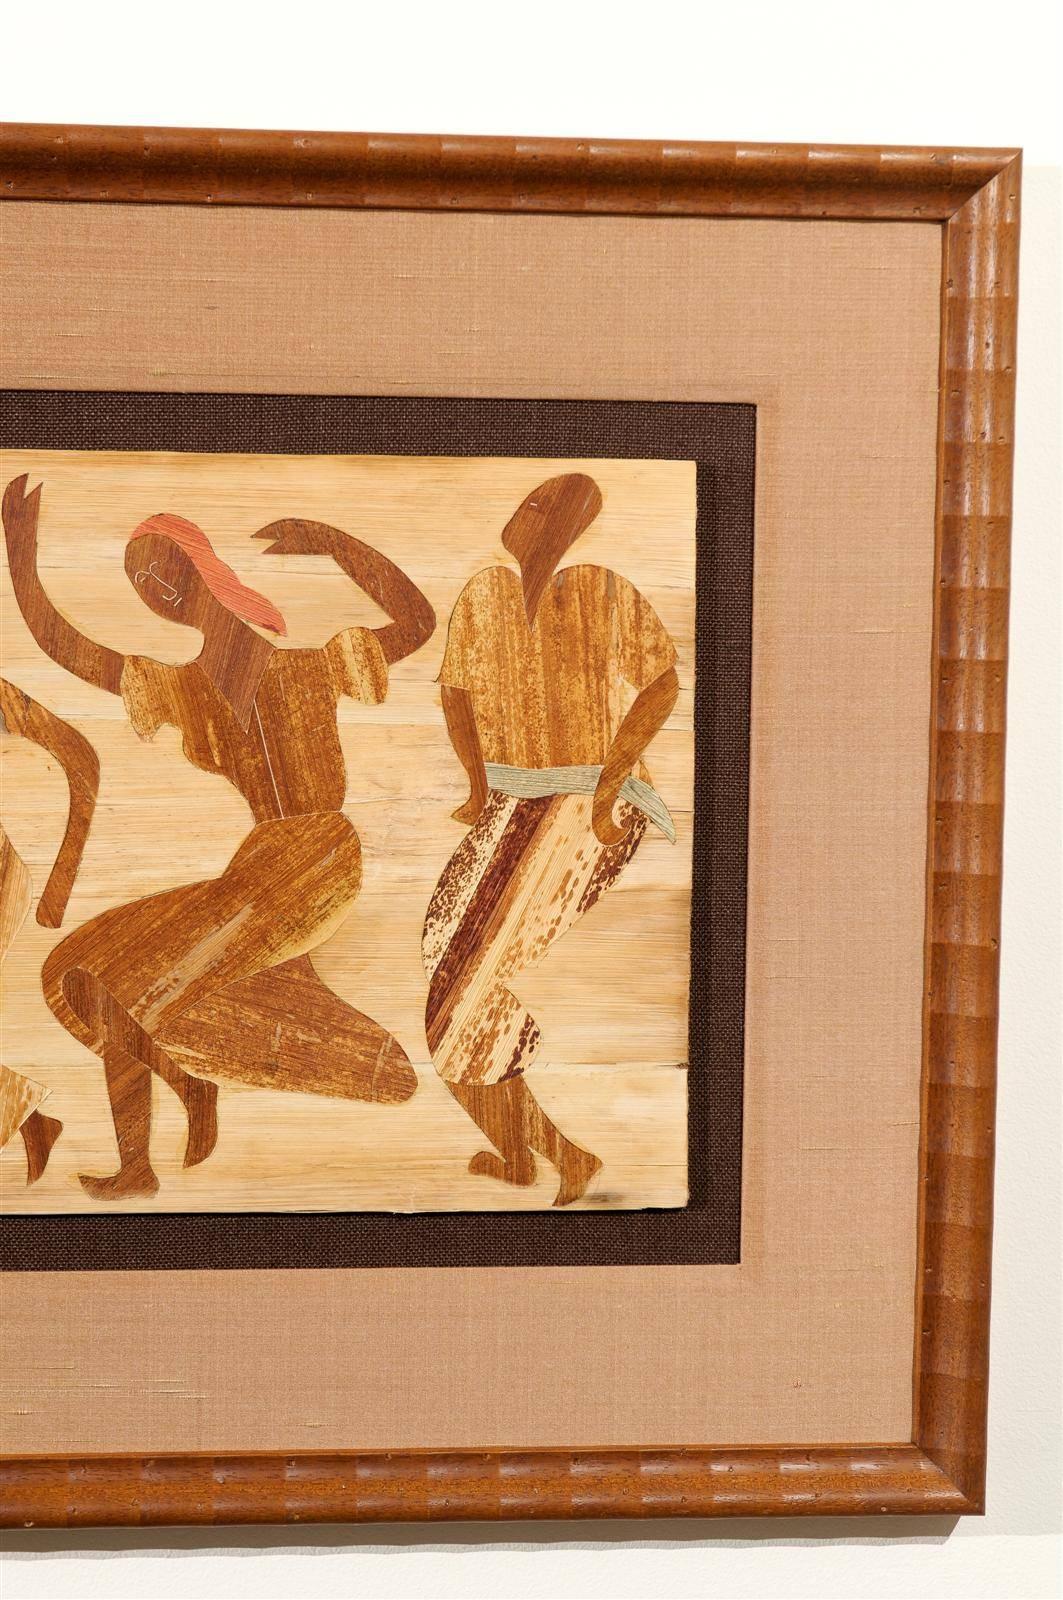 Exceptional Folk Art Dance Scene Executed in Wood Inlay In Excellent Condition For Sale In Atlanta, GA